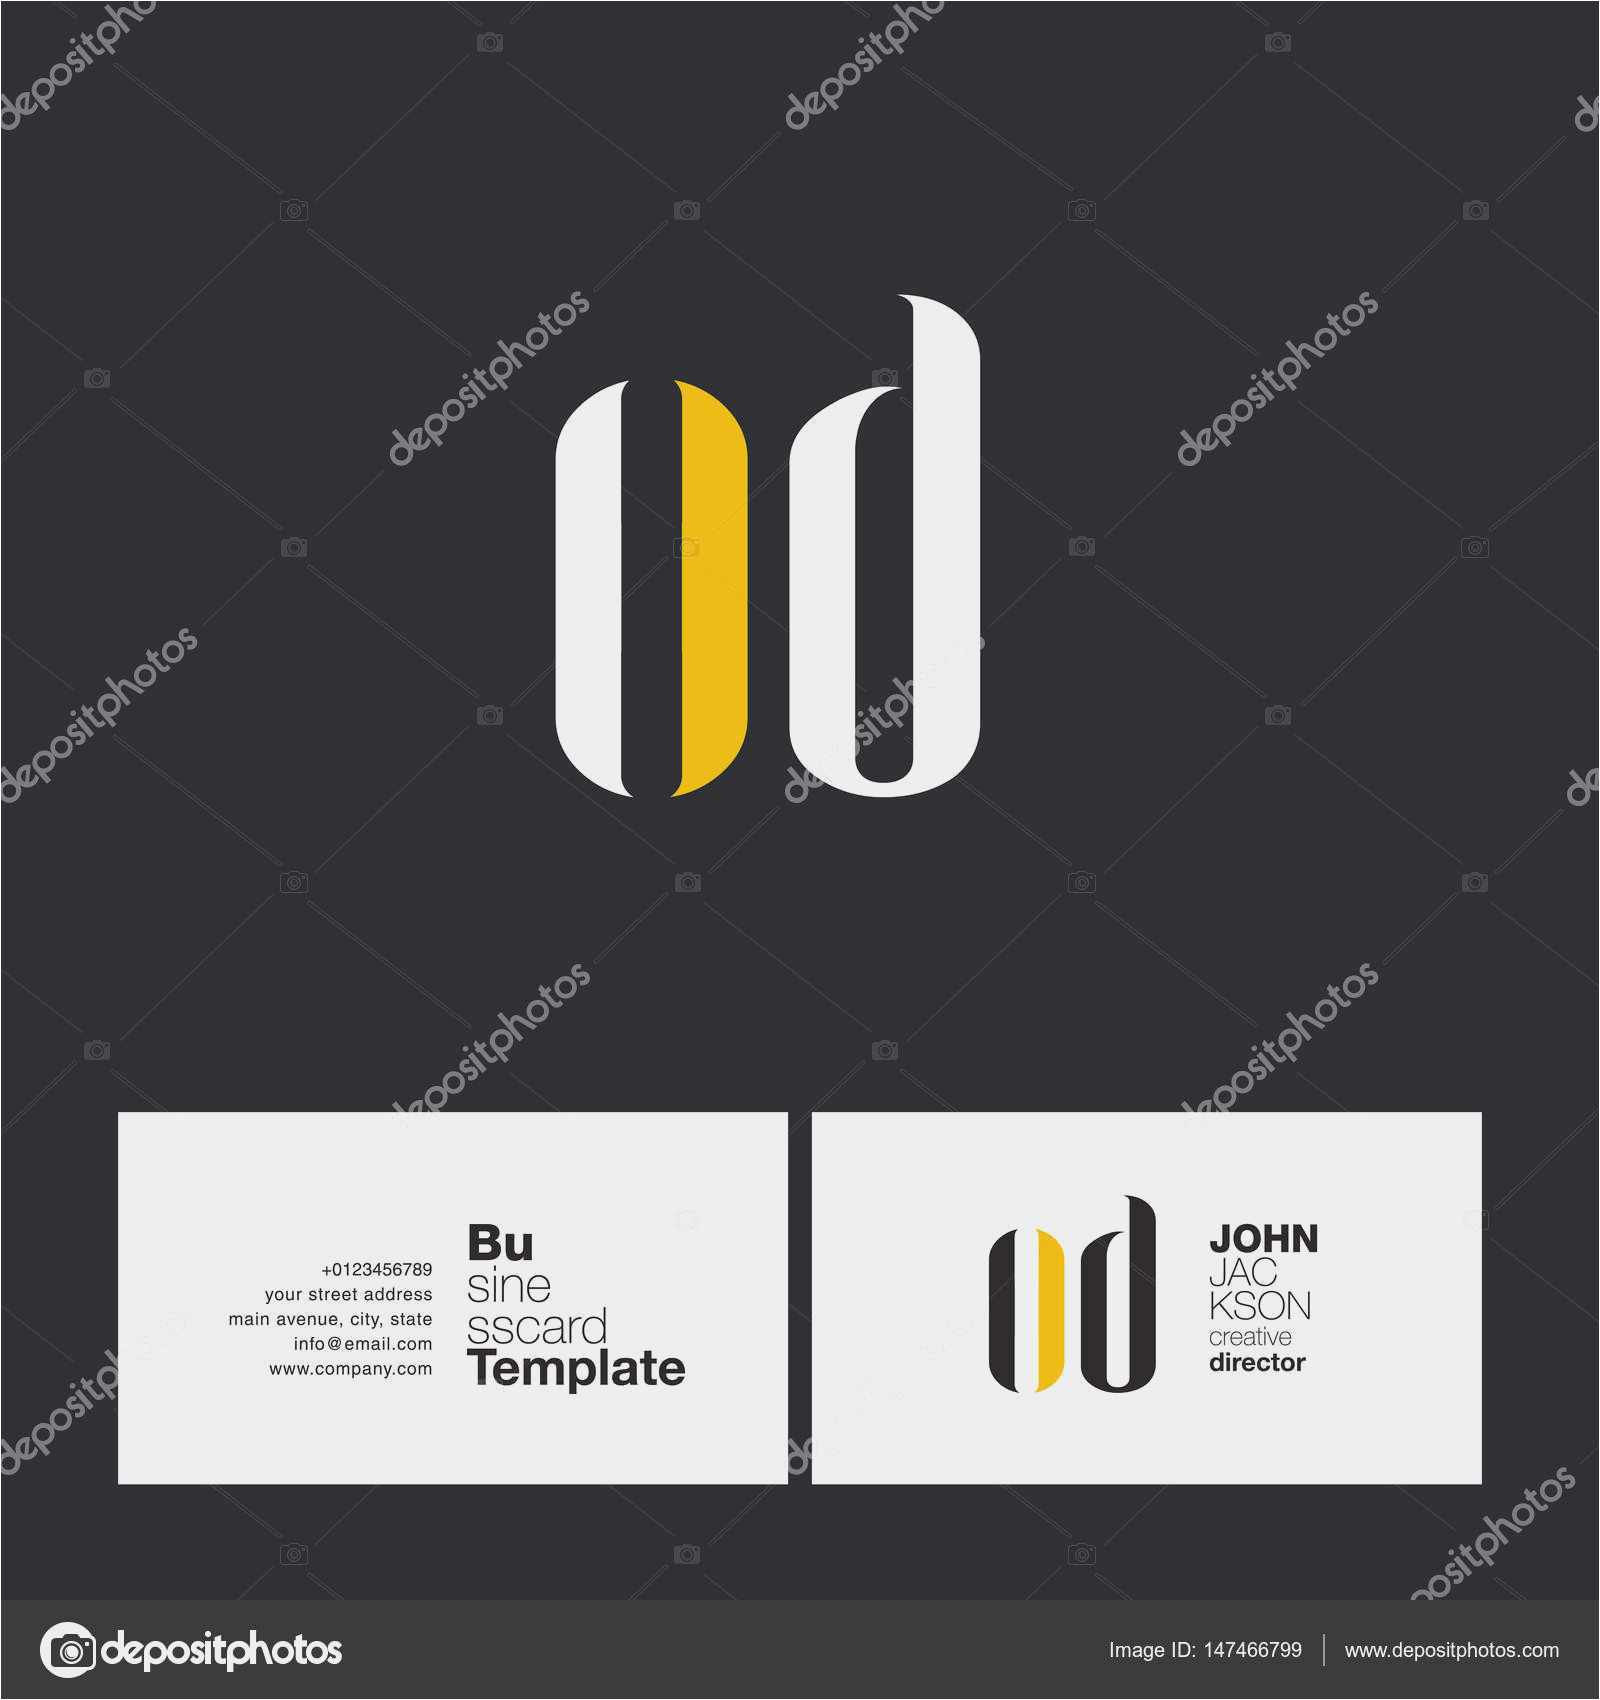 Free Designing Business Cards Business Card Sample Design Of Business Cards Online Free Templates